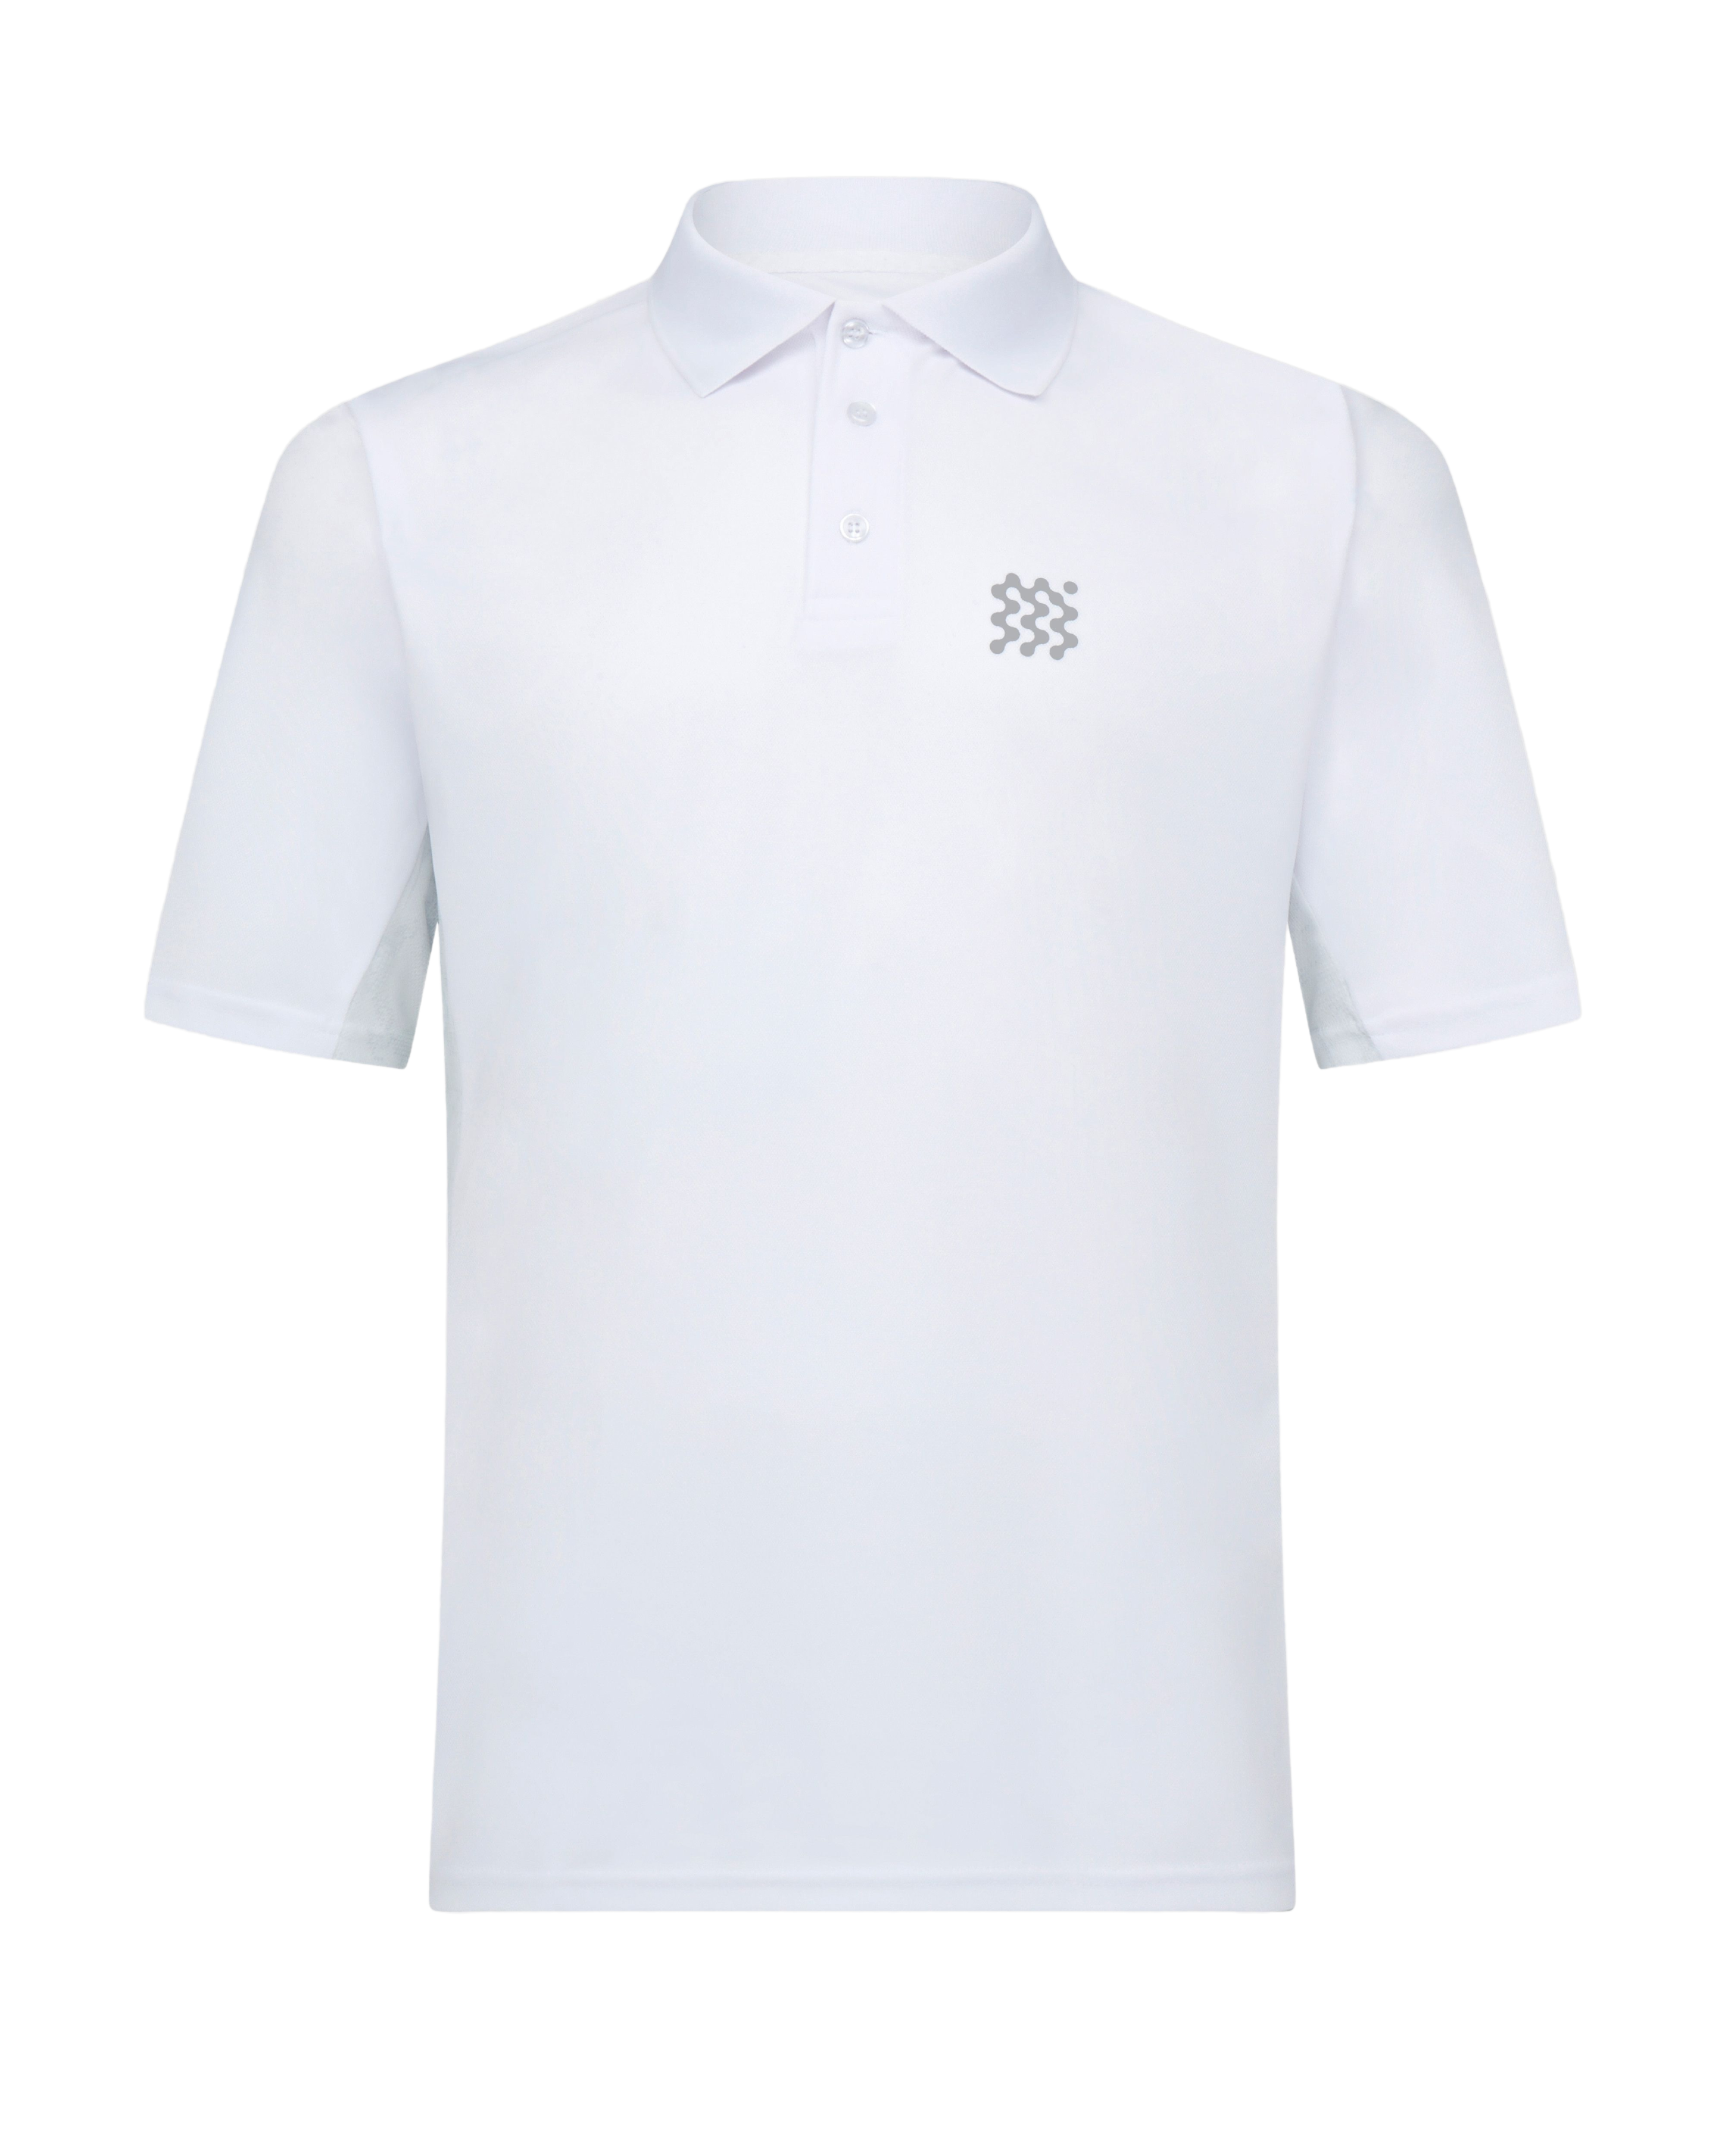 MANORS Men's The Course Polo | golf and sports fashion brands at agorabkk 